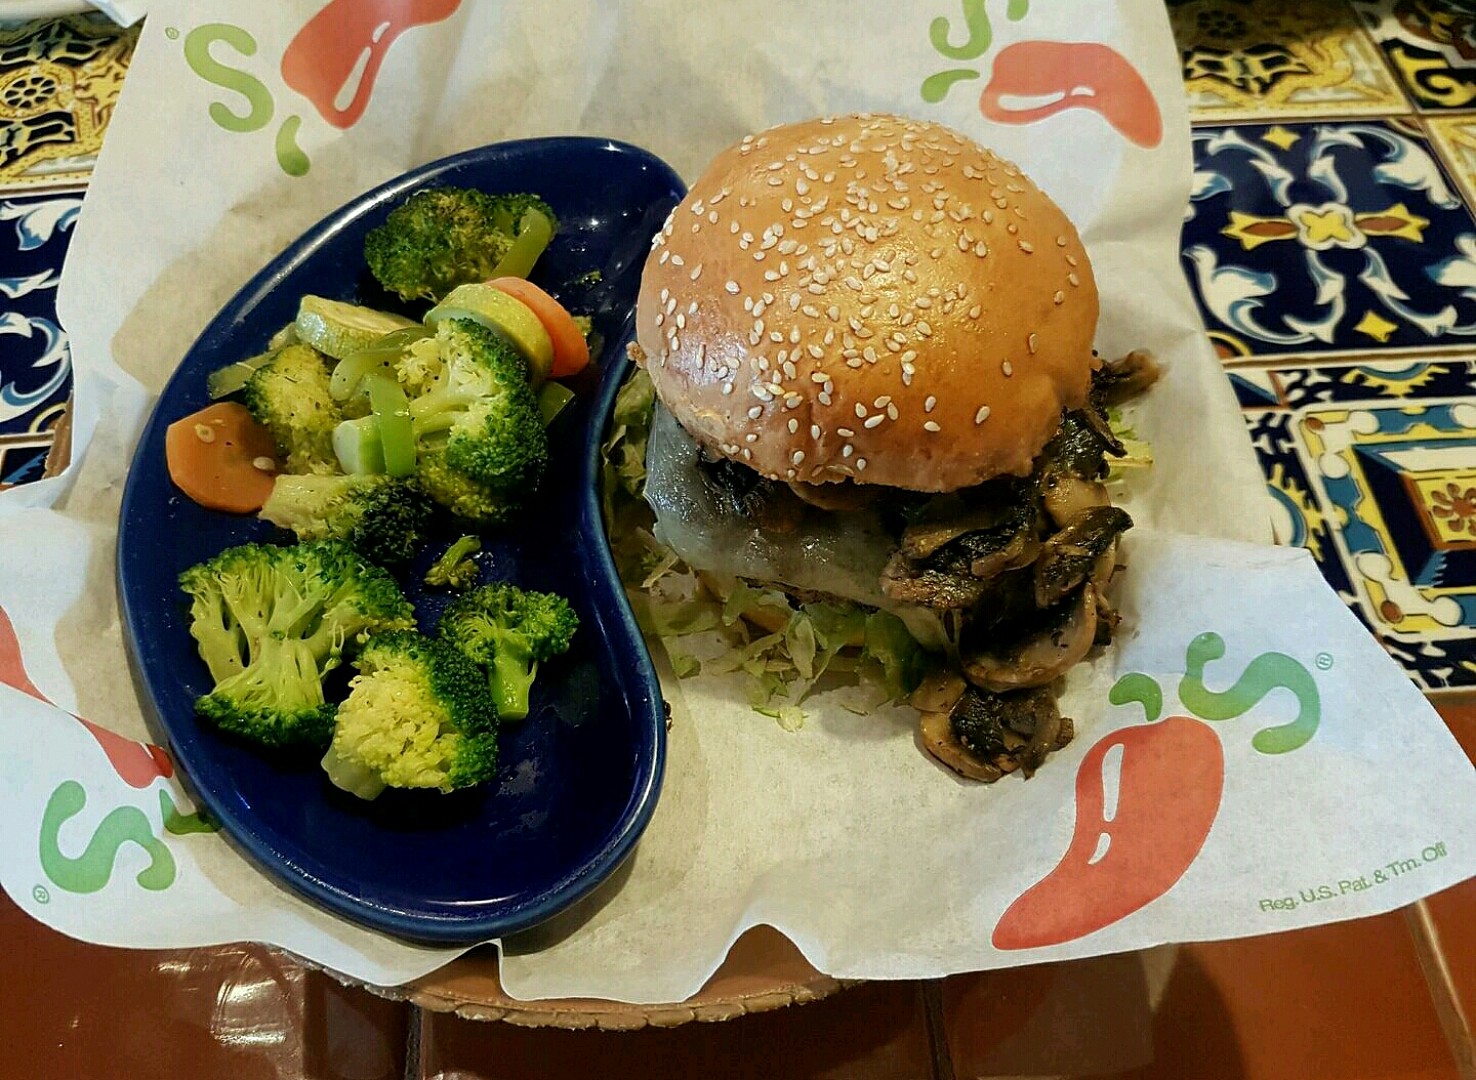 Healthy sides with new York #burger @ Chili's - Bahrain